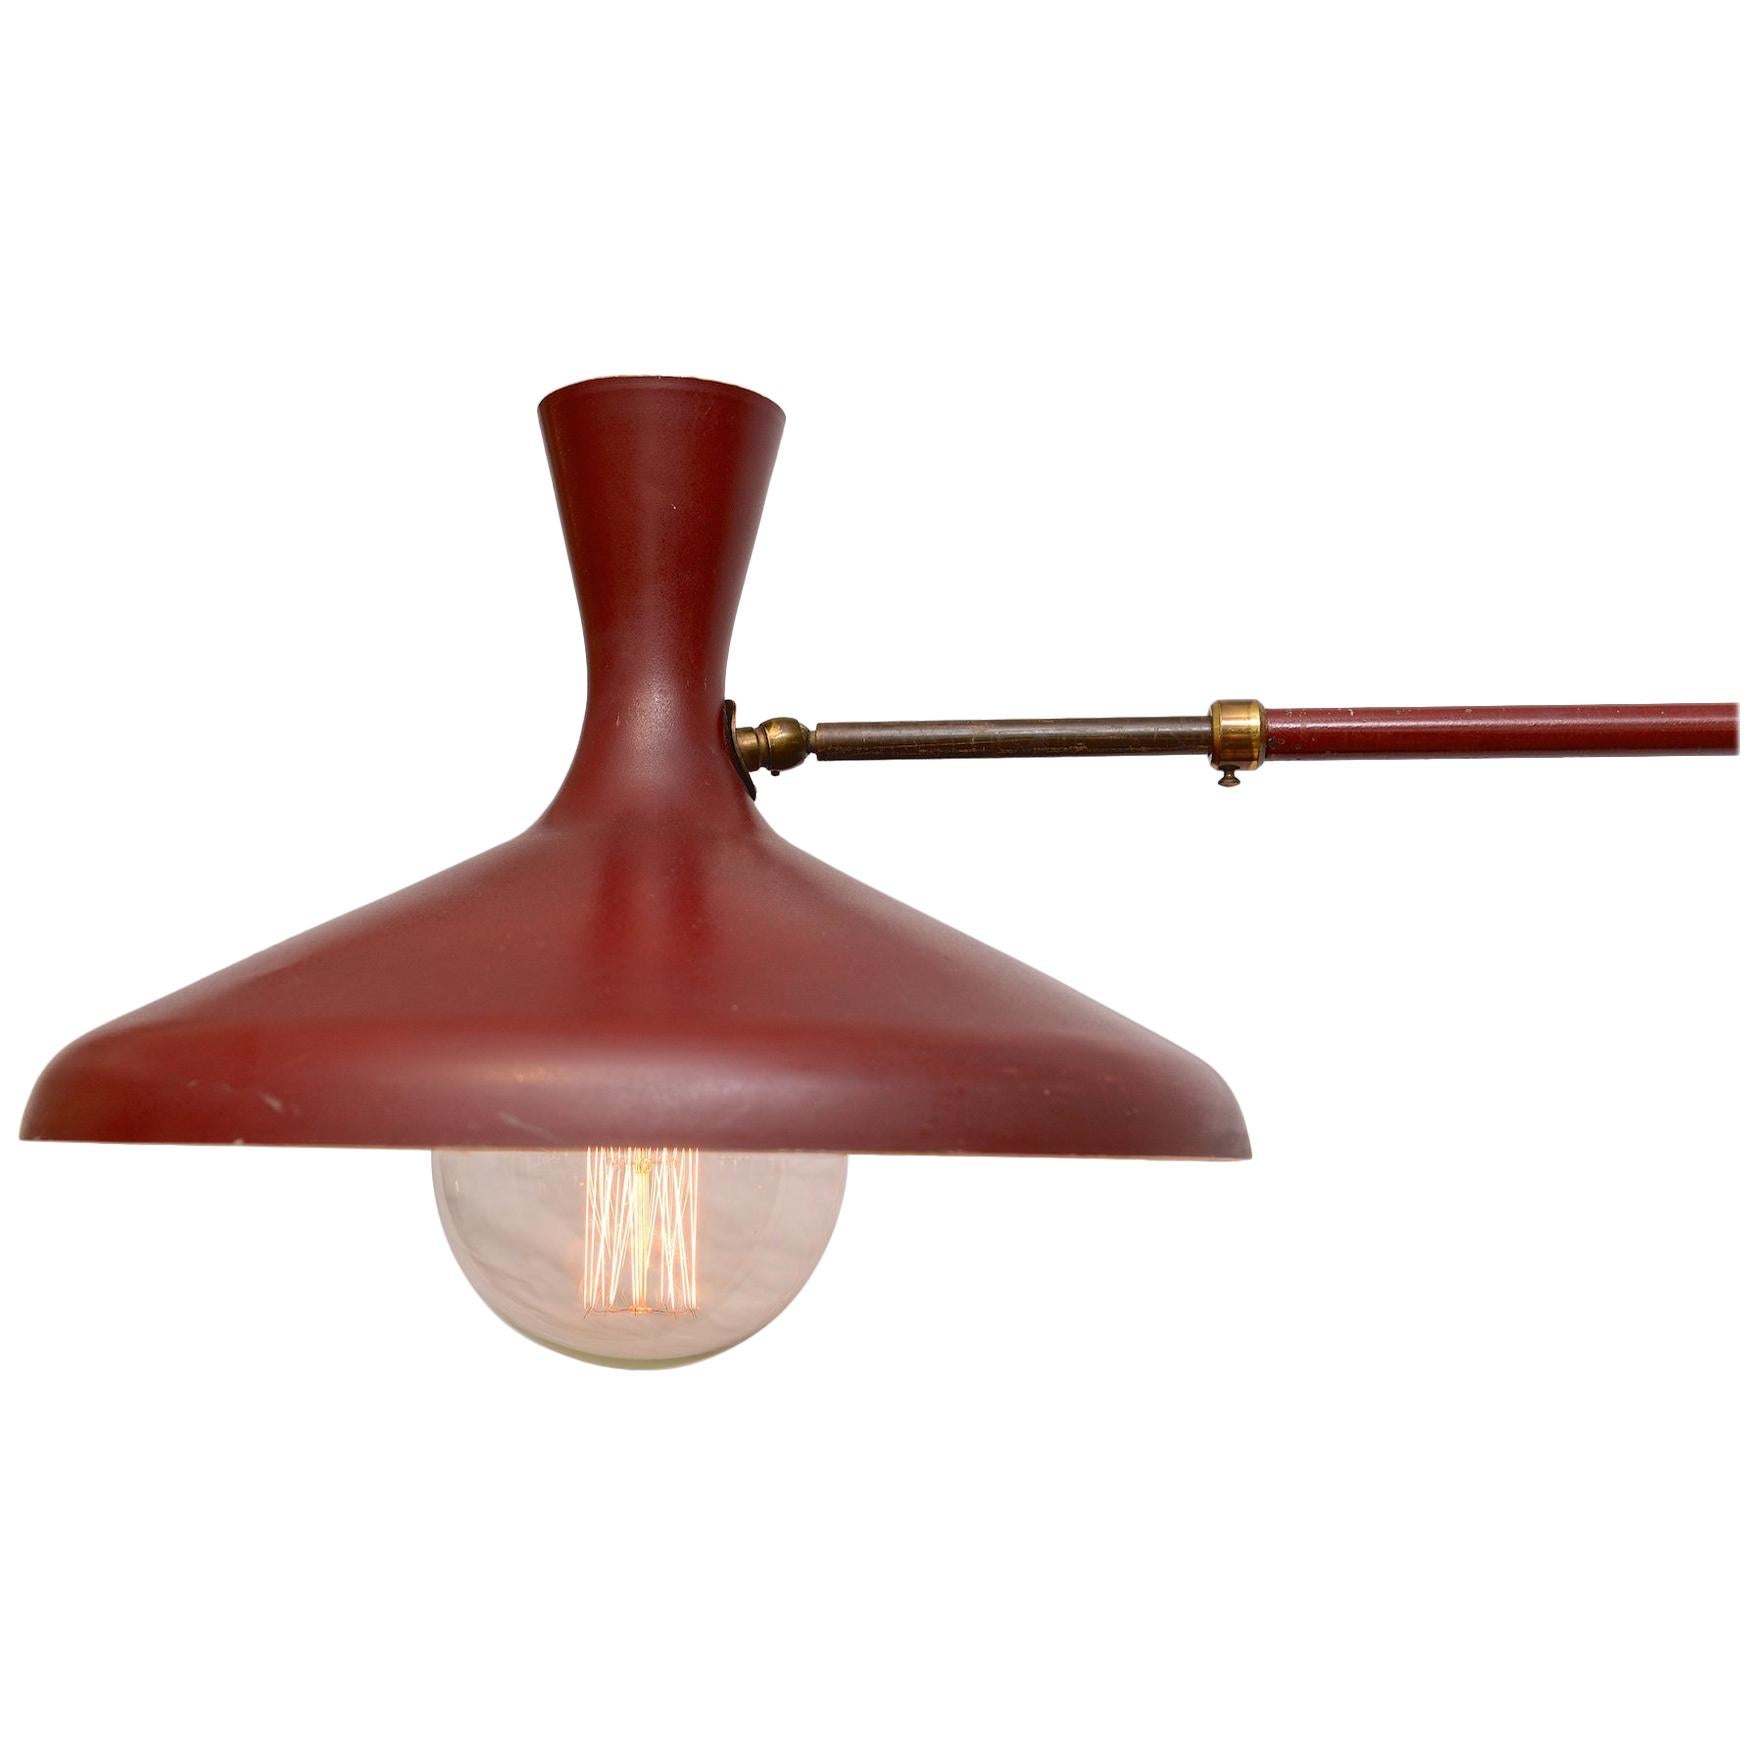 Deep red, mid-century  swing arm wall light

Original paint work in excellent condition

Re wired and PAT tested.